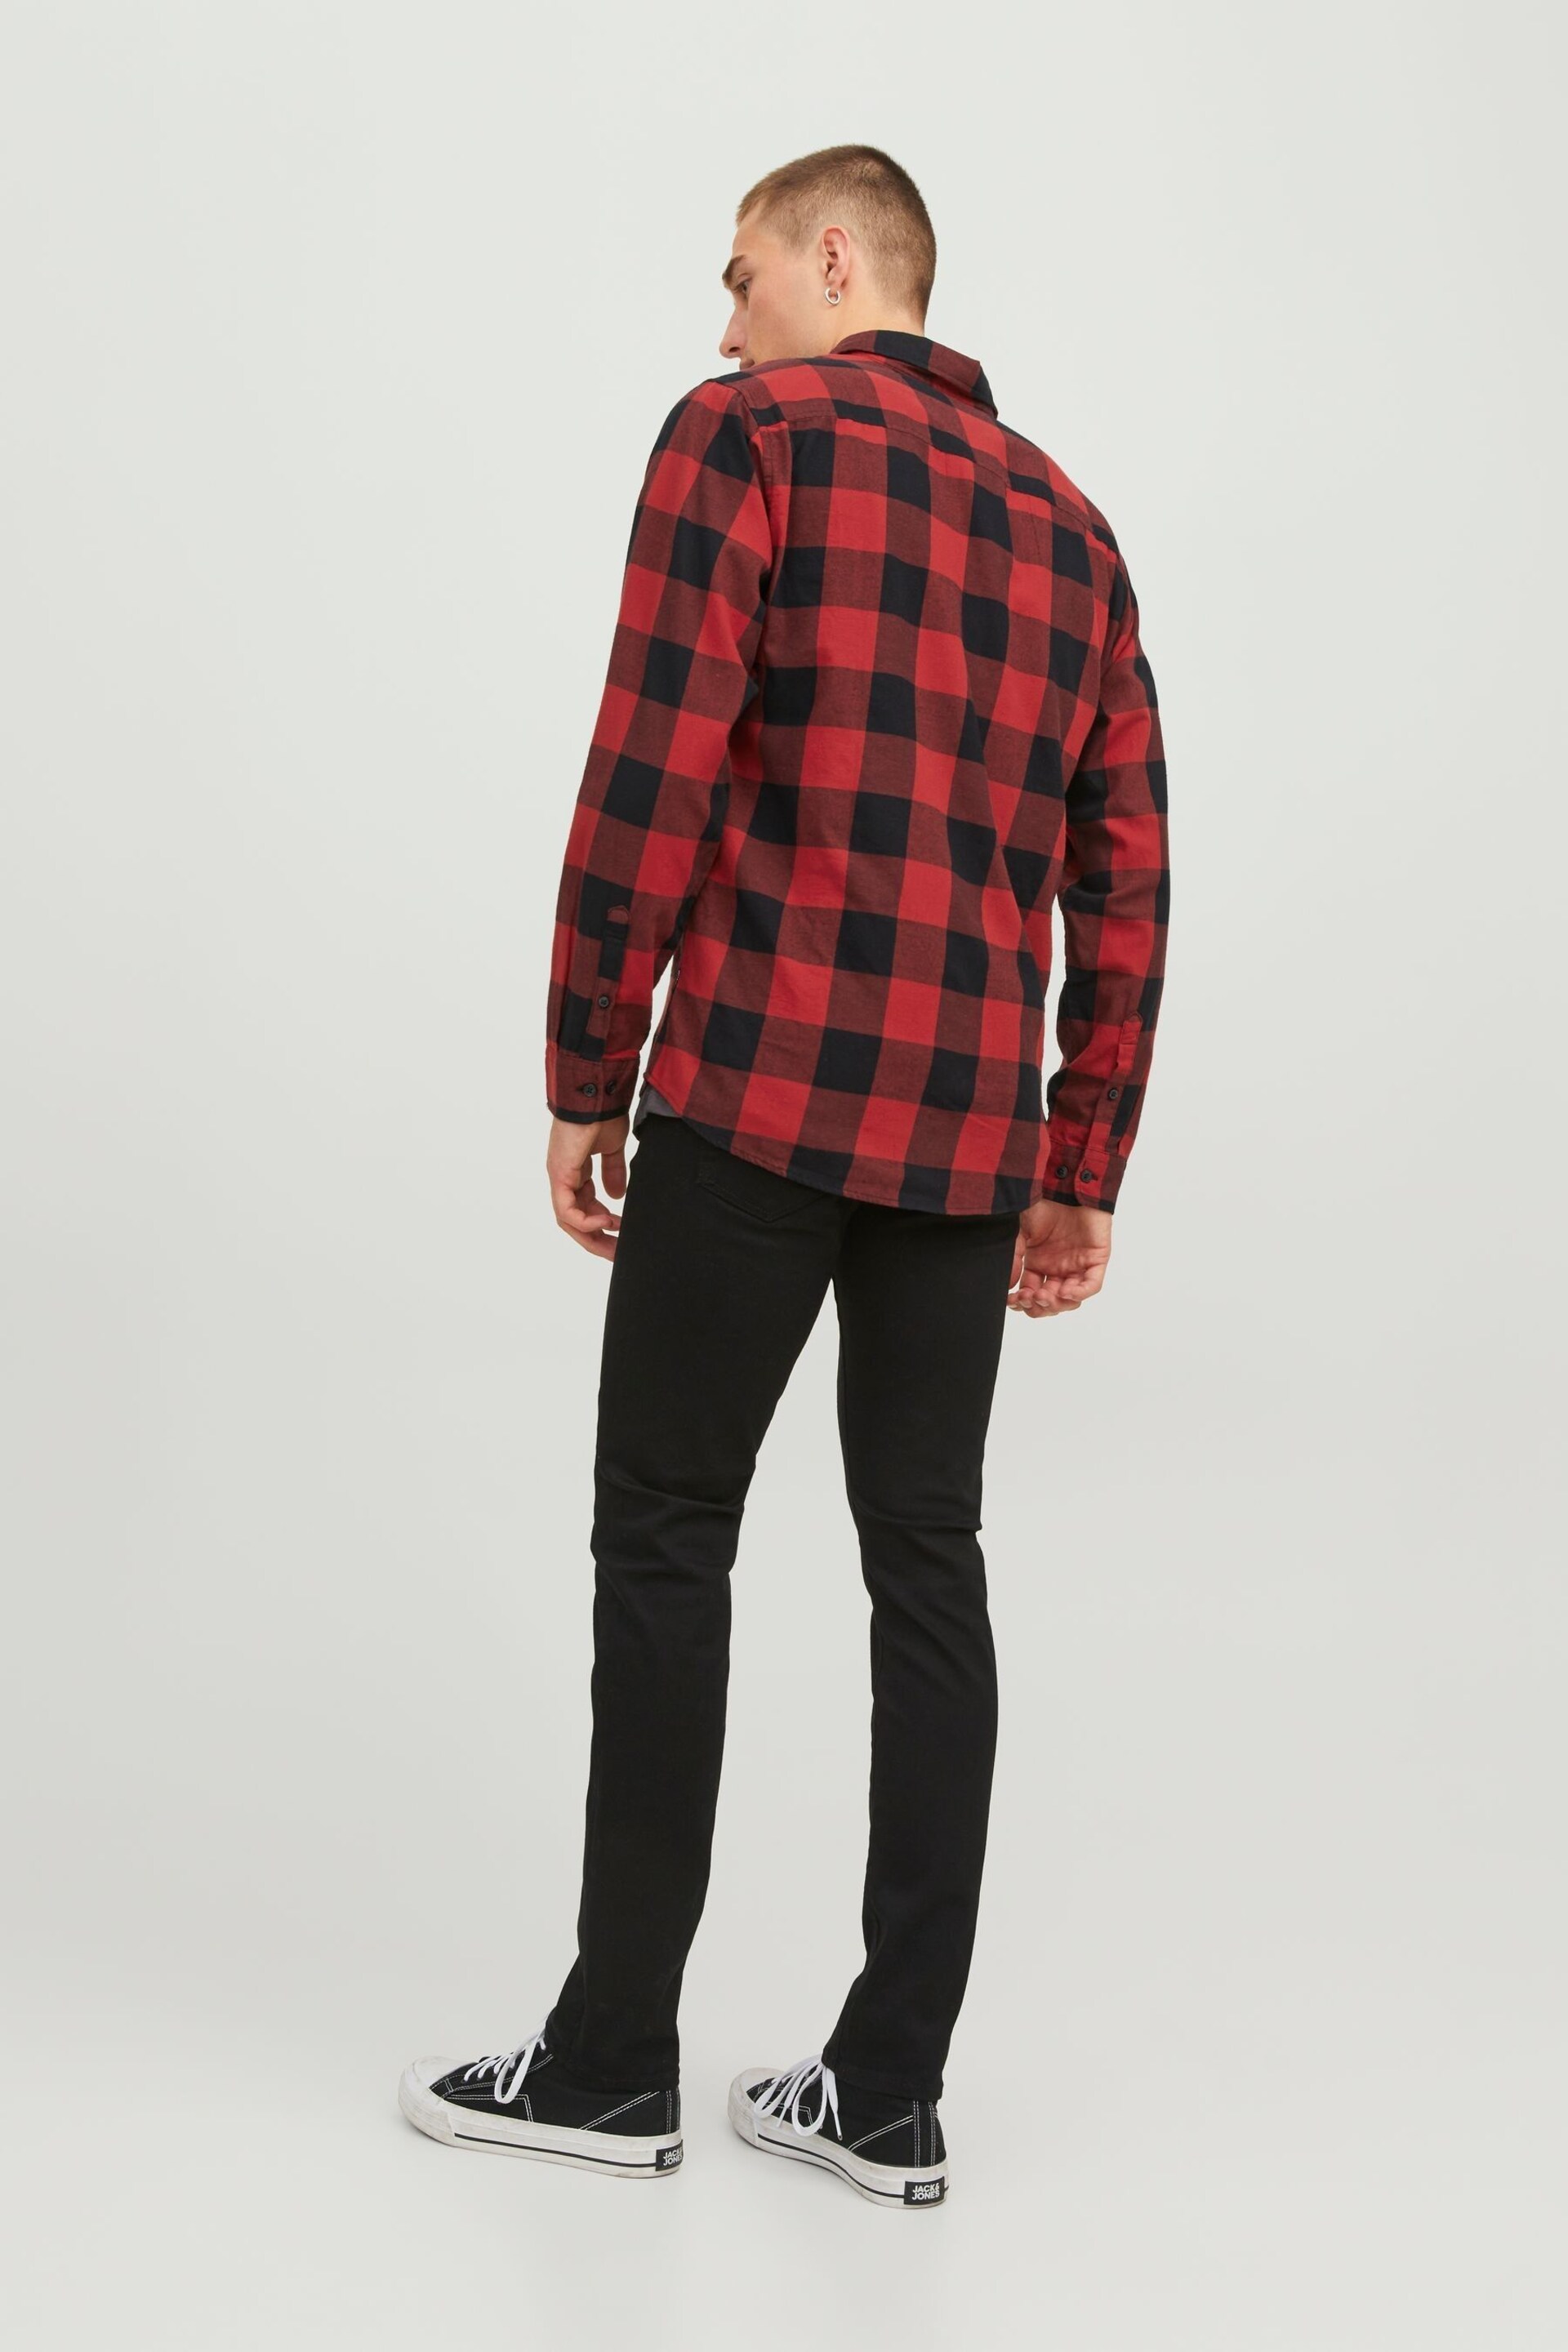 JACK & JONES Red Button Up Shirt - Image 2 of 6